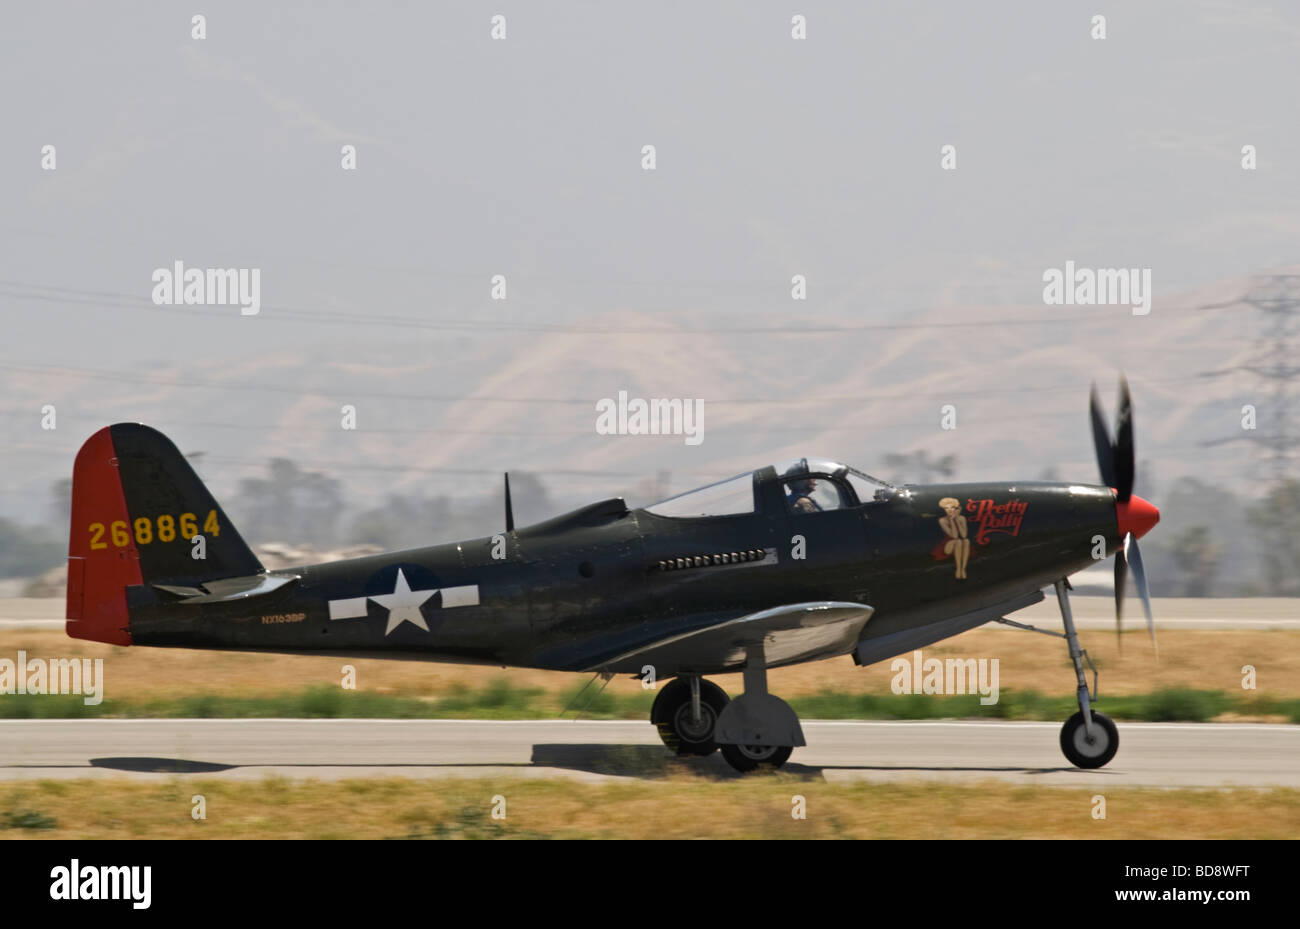 A P-63 Kingcobra taxis on the runway after flying at an air show. Stock Photo